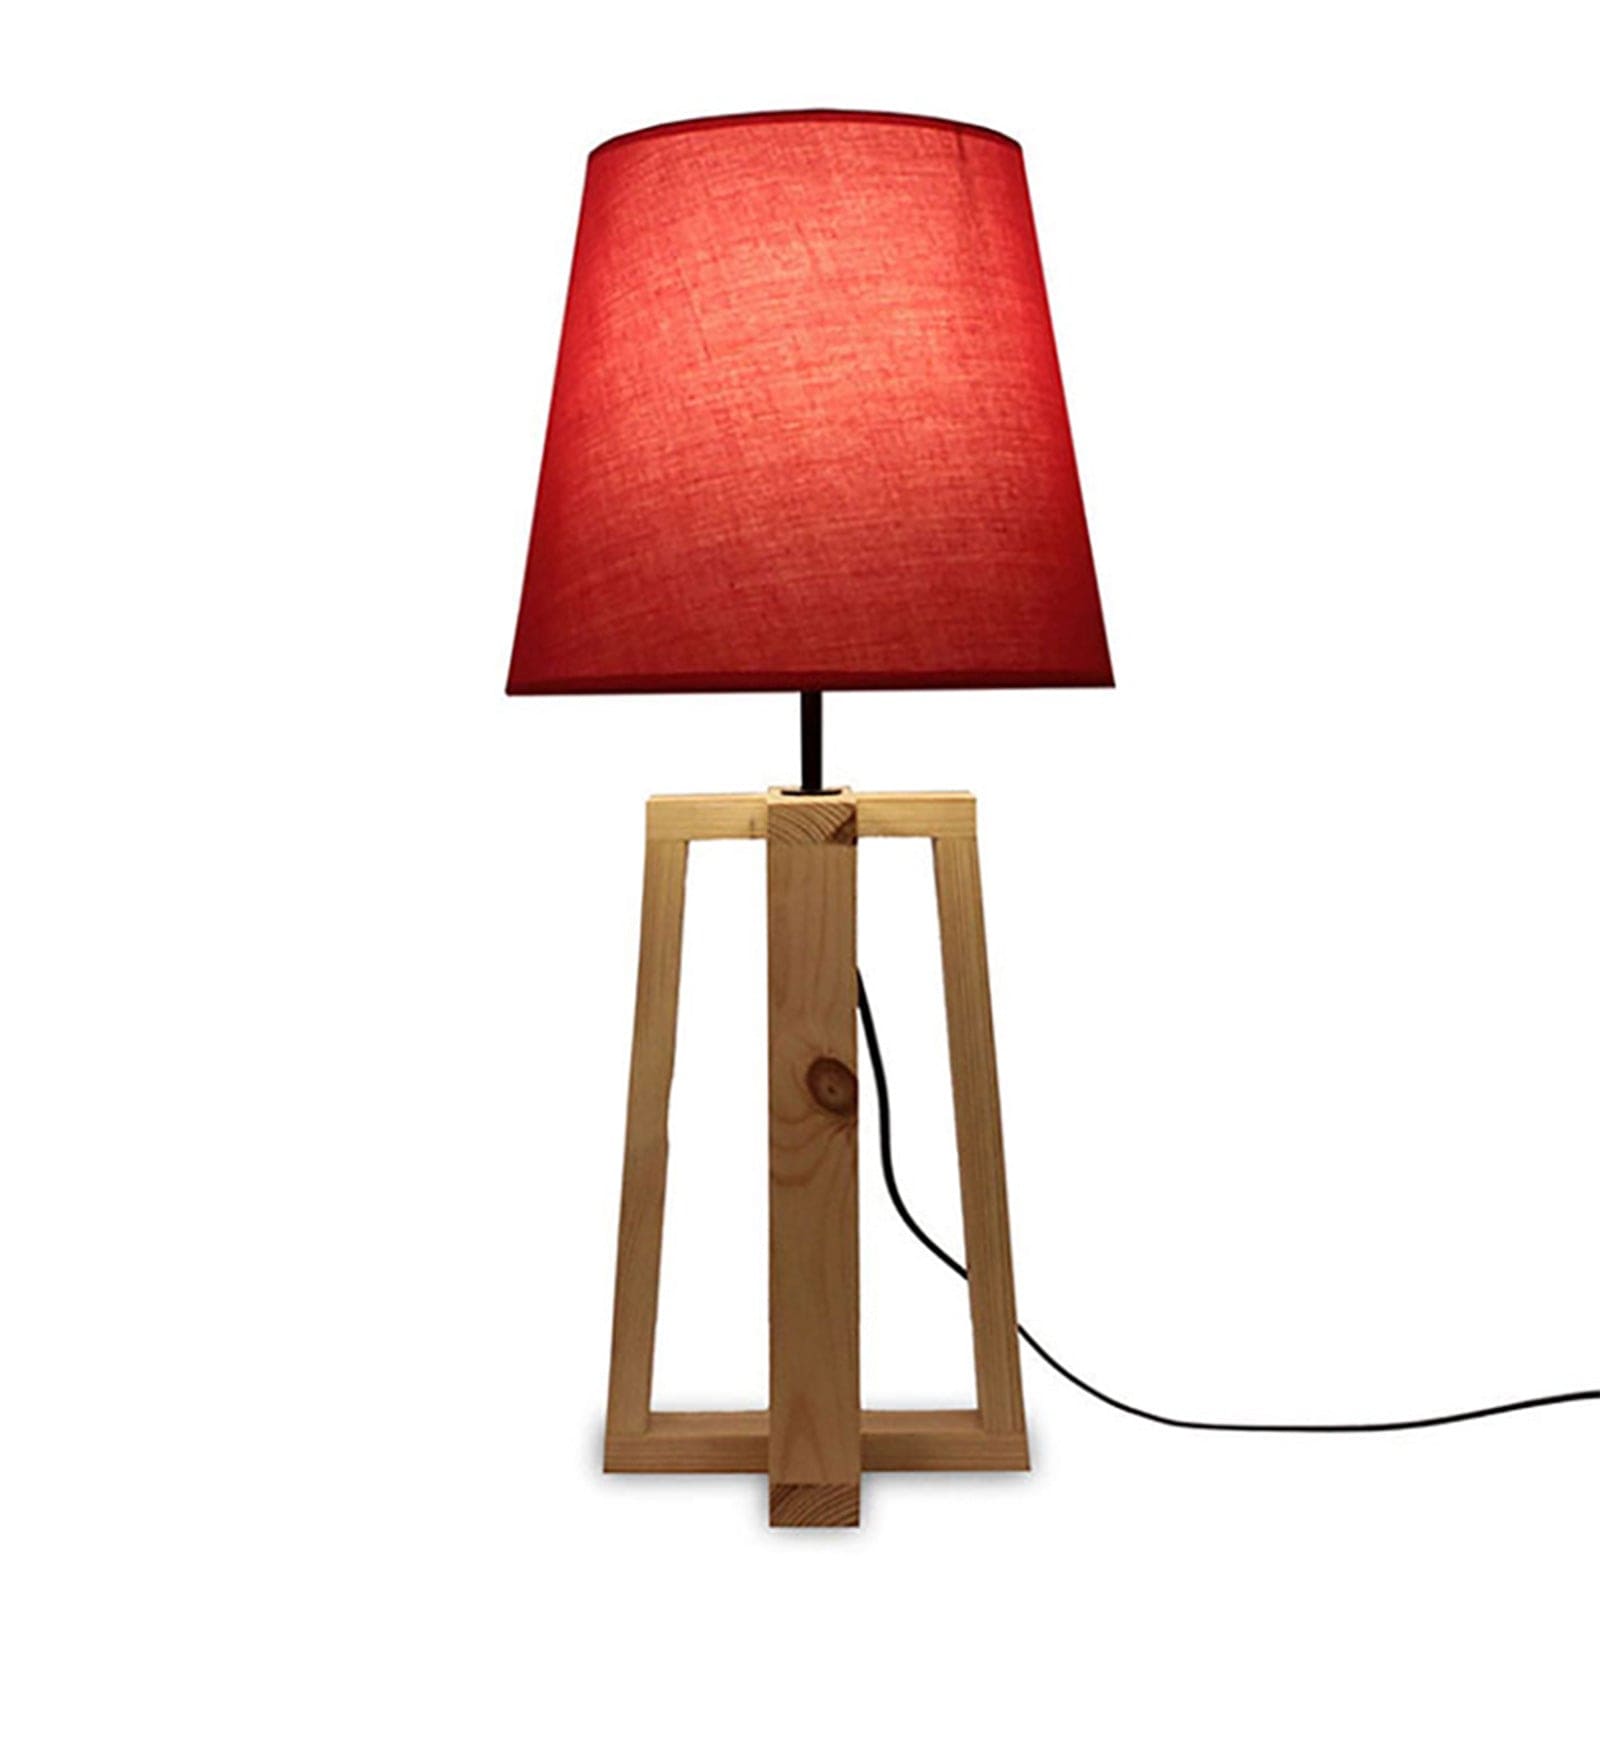 Blender Beige Wooden Table Lamp with Red Fabric Lampshade (BULB NOT INCLUDED)